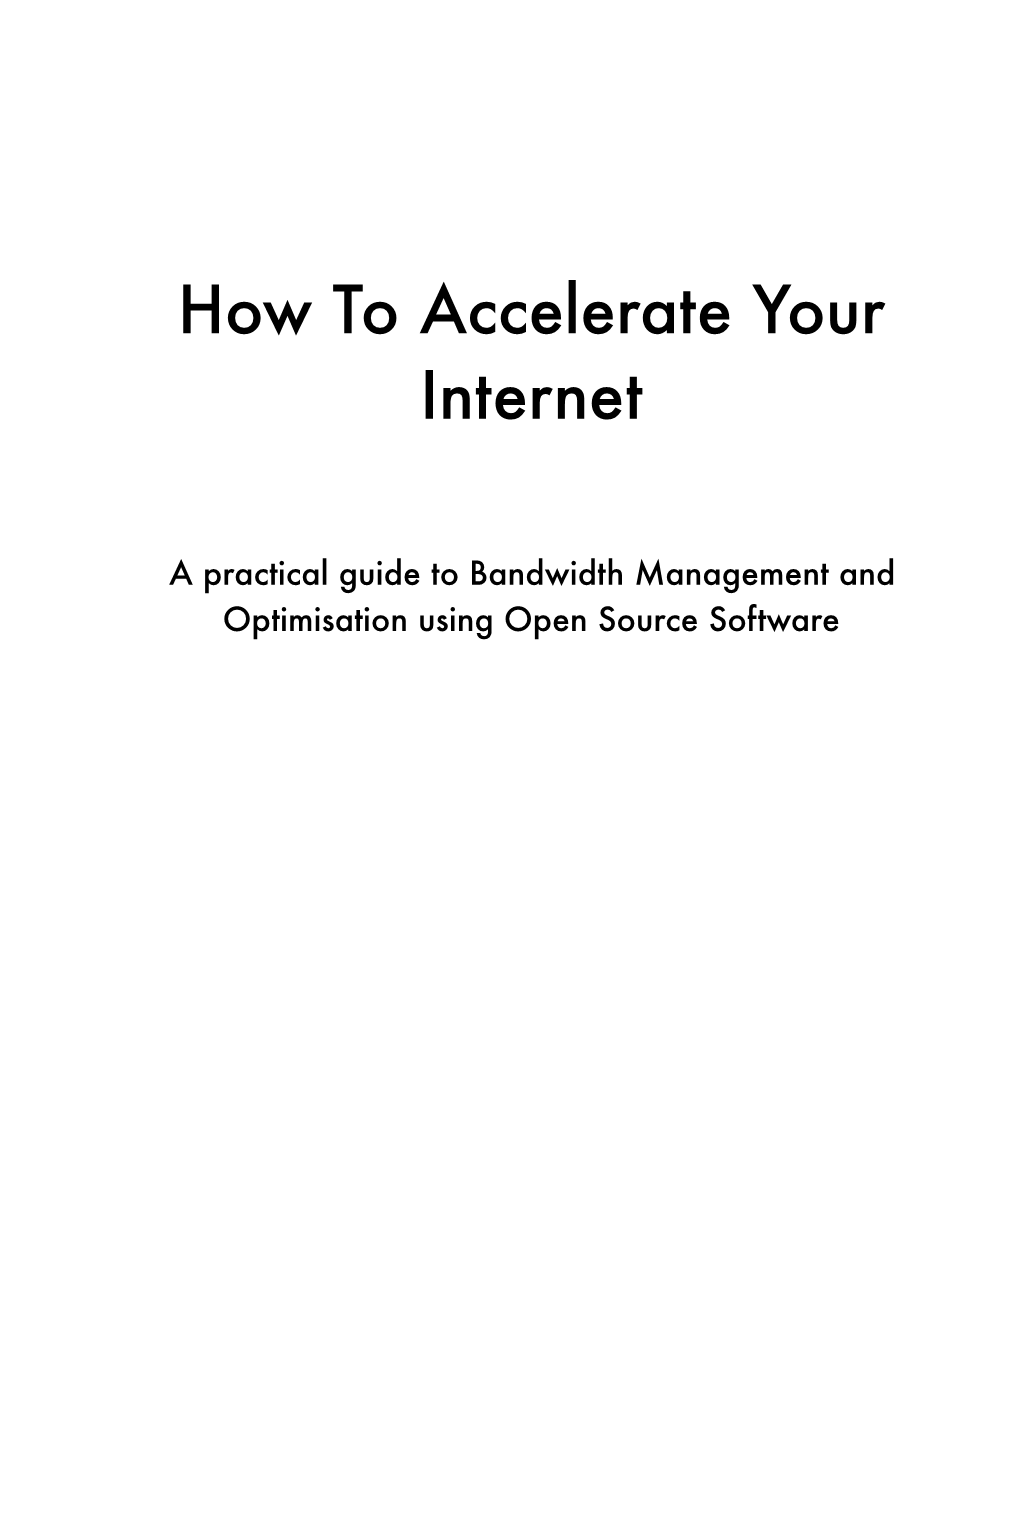 How to Accelerate Your Internet. a Practical Guide to Bandwidth